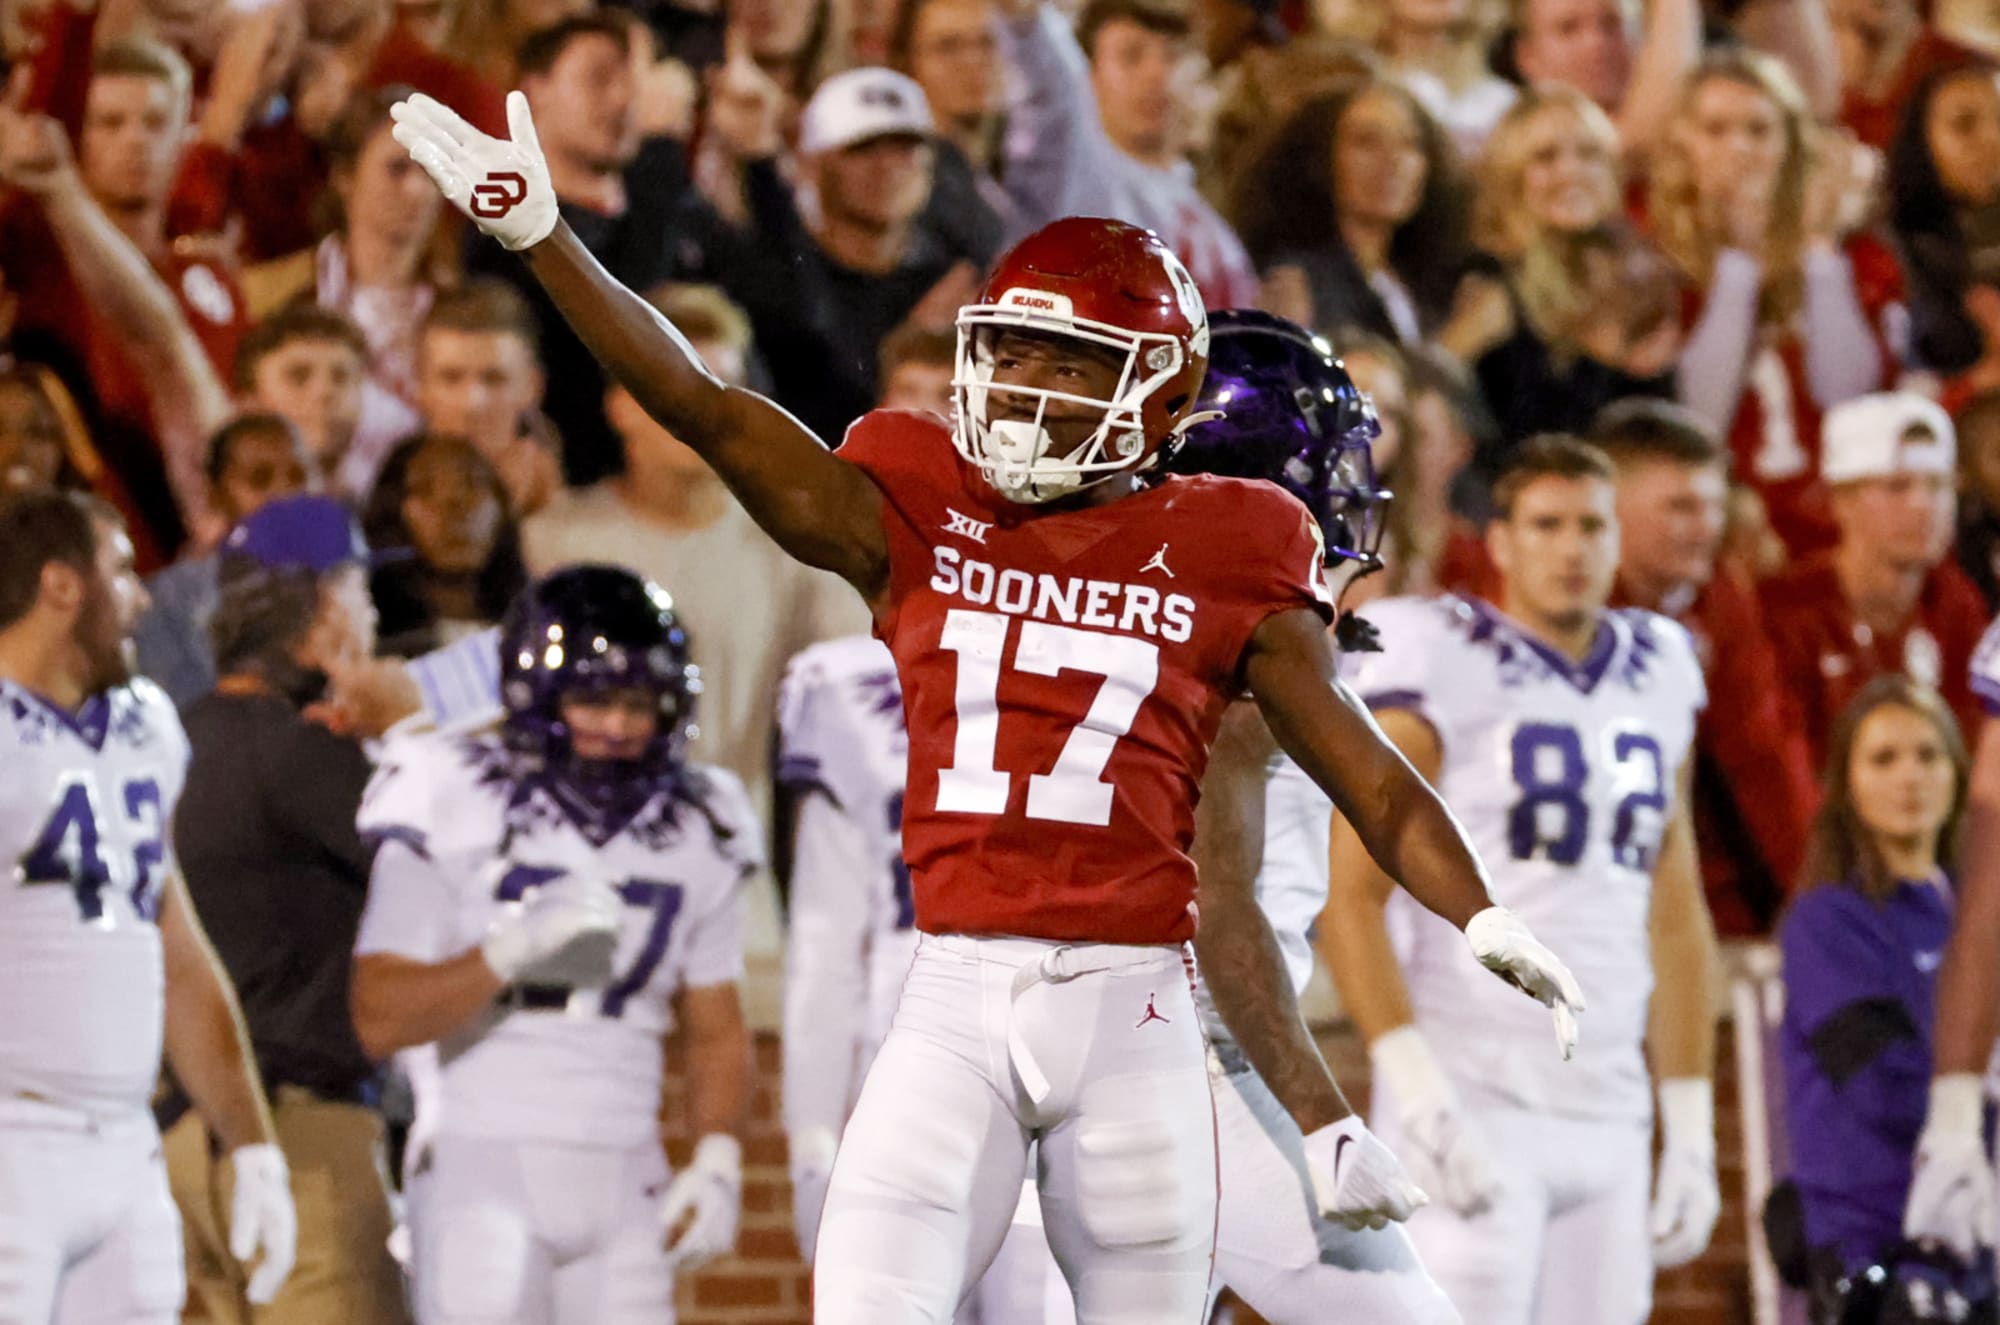 Oklahoma football: Why is OU rebounding so well after Riley’s departure?